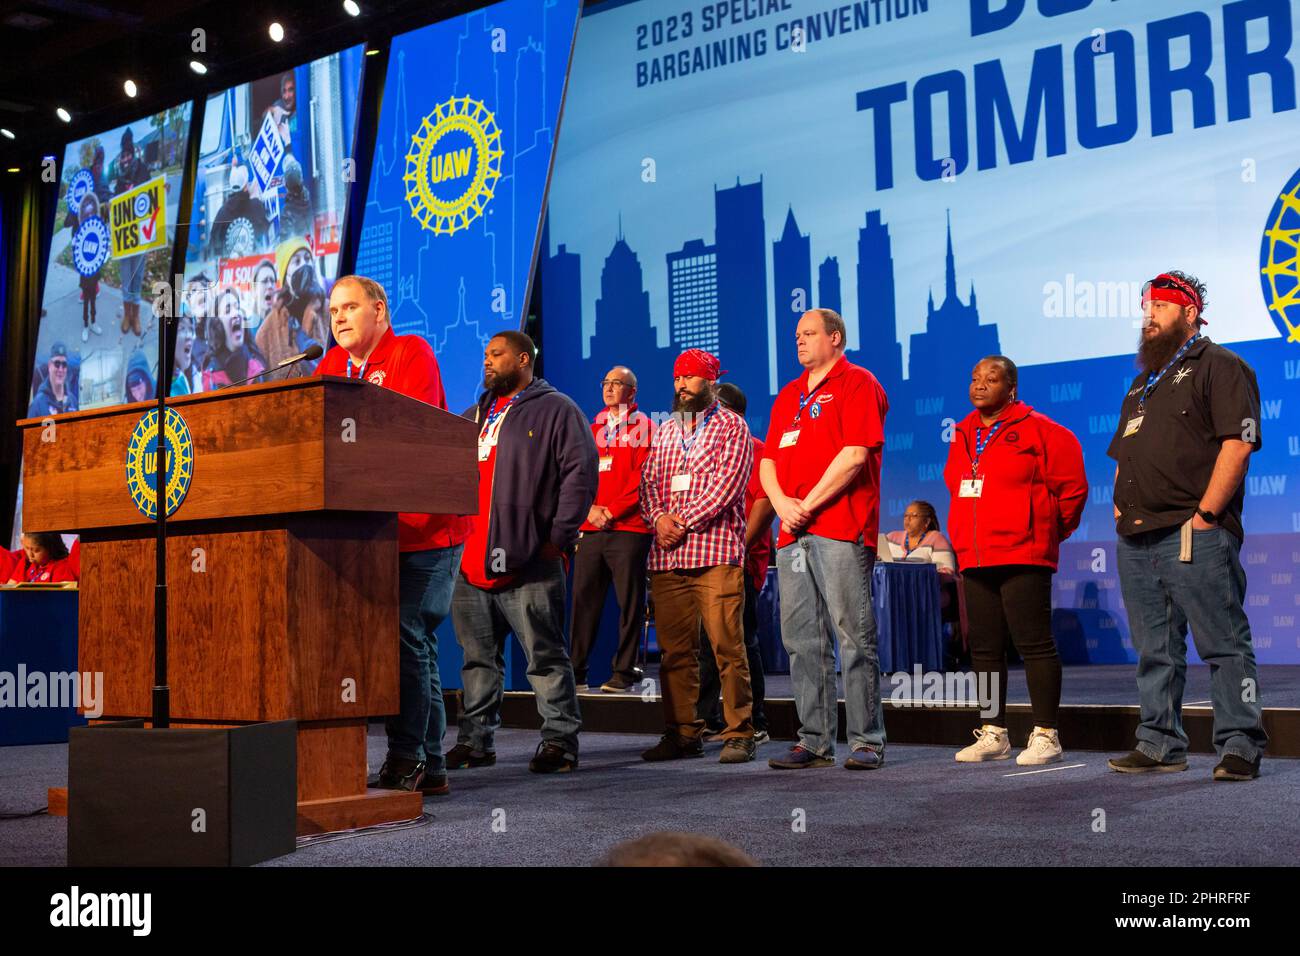 Detroit, Michigan, USA. 29th Mar, 2023. Kevin Logan, president of United Auto Workers Local 1268 and members of his local on stage during the UAW's bargaining convention. The local union's 1,350 workers at Stellantis' Belvidere, Illinois Jeep assembly plant are out of work, they were laid off indefinitely when the plant stopped operations March 1. Job security is one of the union's primary goals in this year's contract bargaining. Credit: Jim West/Alamy Live News Stock Photo